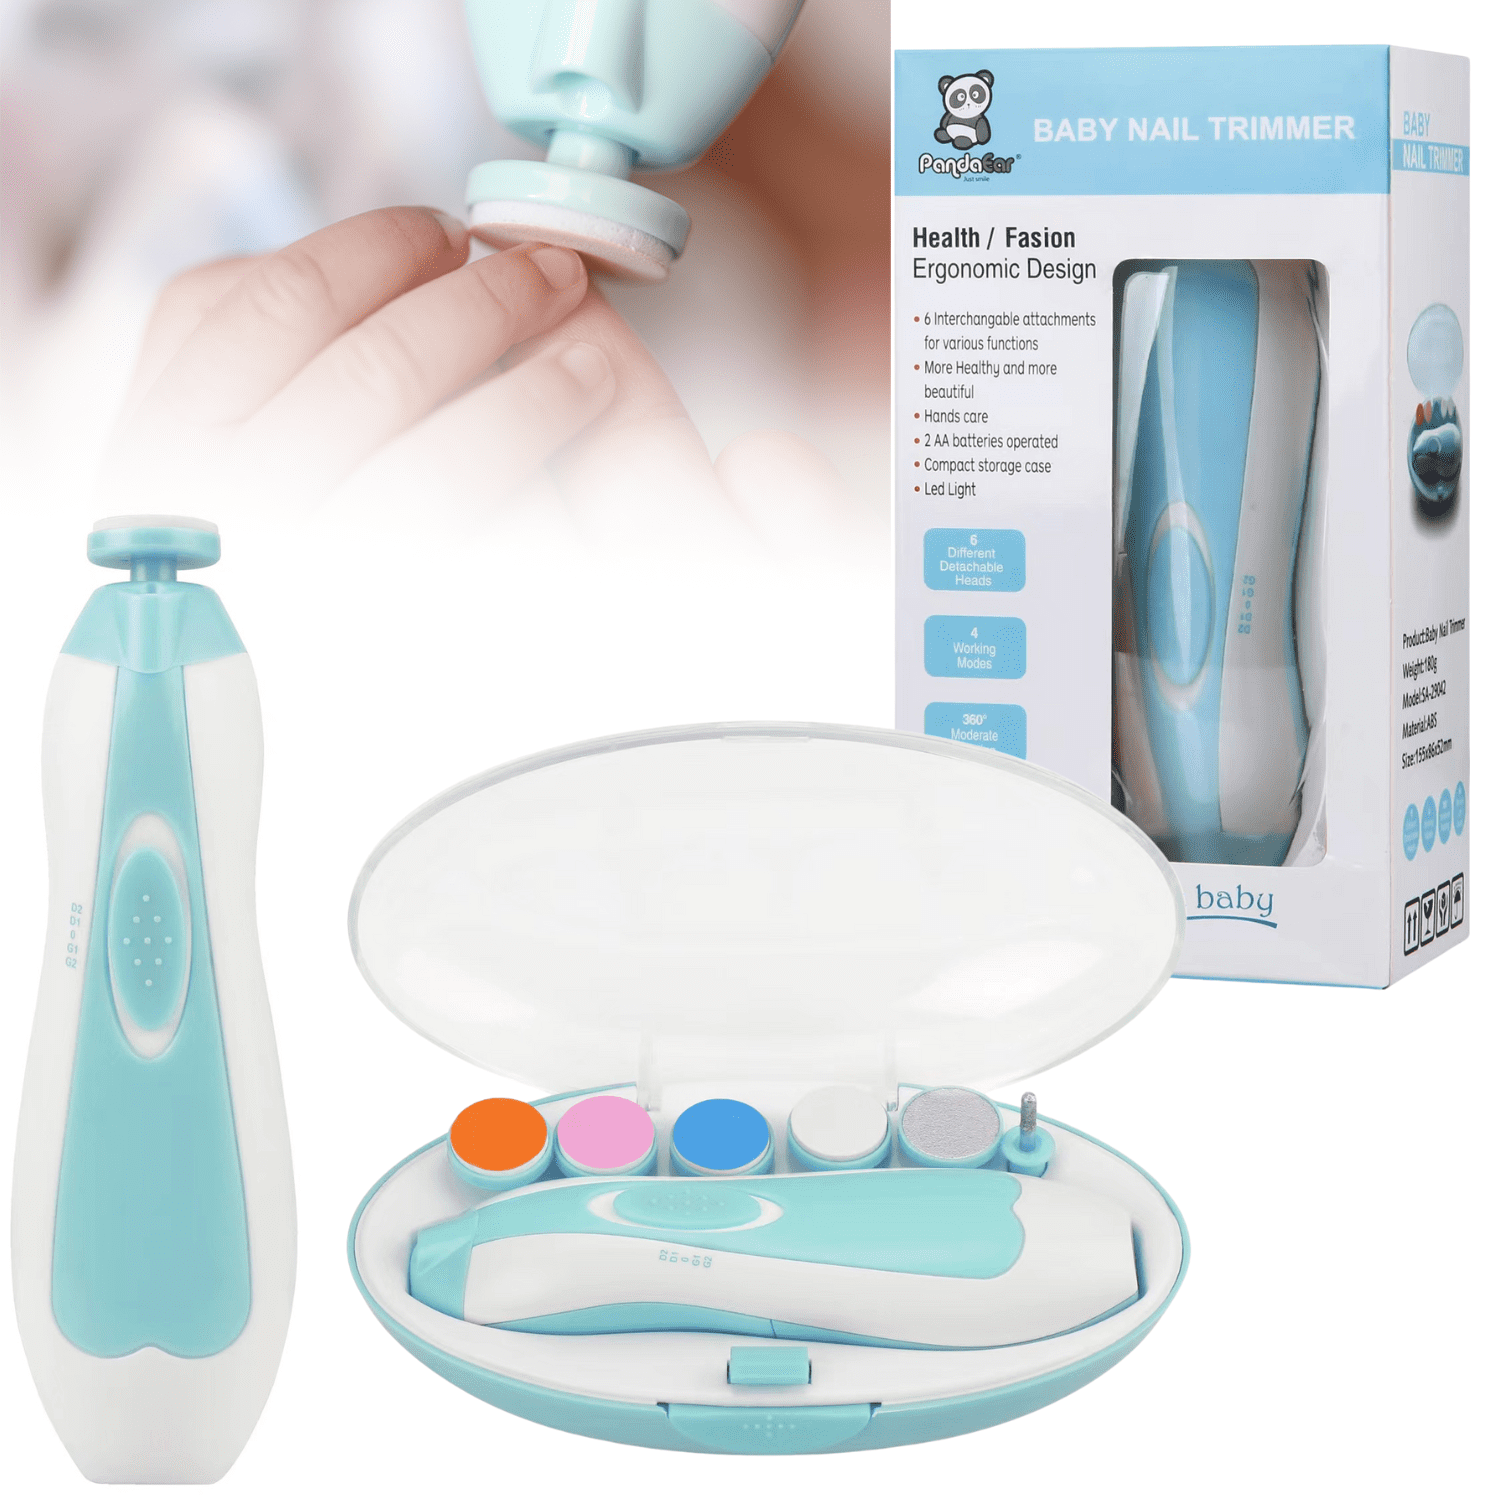 PandaEar Baby Nail Trimmer Electric Baby Nail Clippers Safe Baby Nail File Kit with Extra 6 Replacement Pads Blue 4e6f762e ff10 4e4f b77a e48dff36610f.e7f21ca2e4616851e46be1abf8957adb